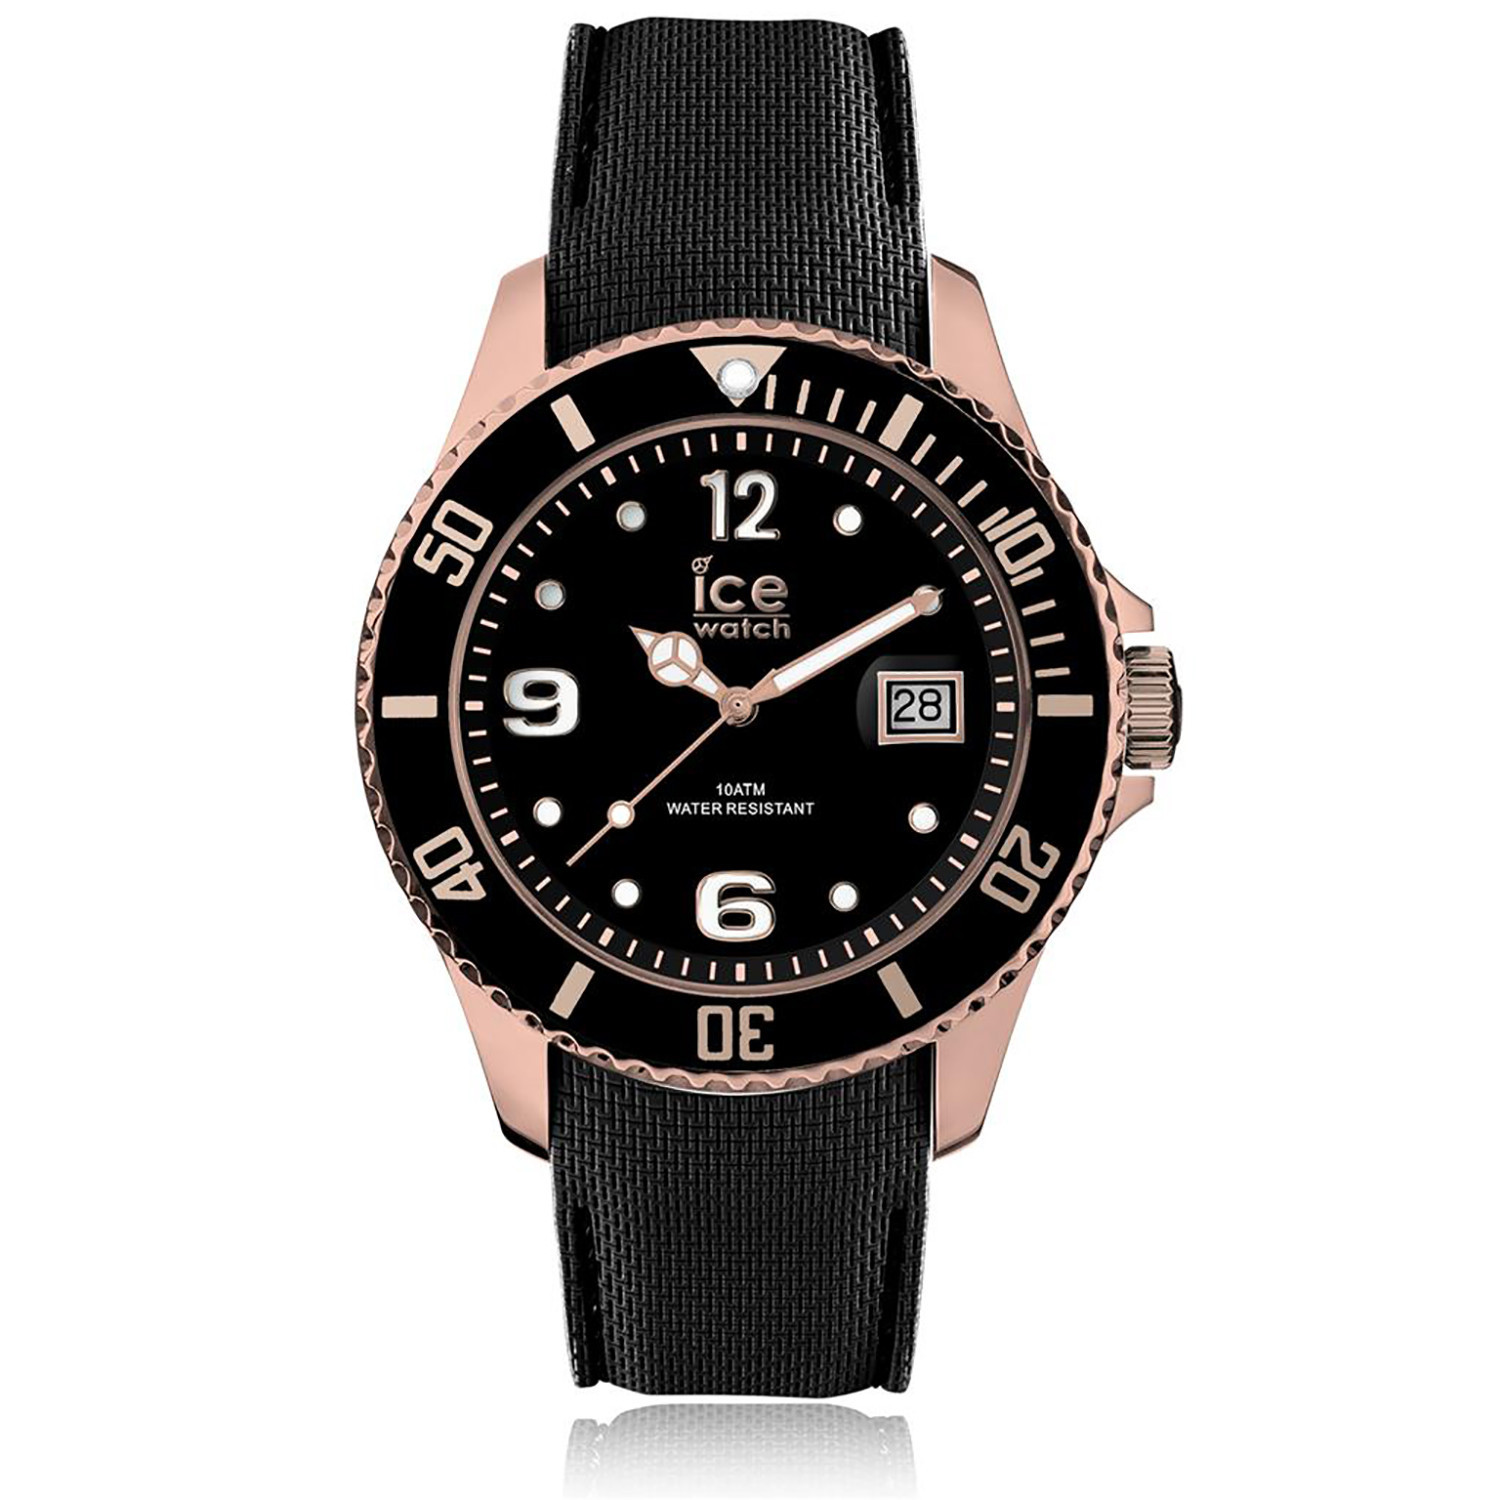 Montre Ice Watch Black rose gold large